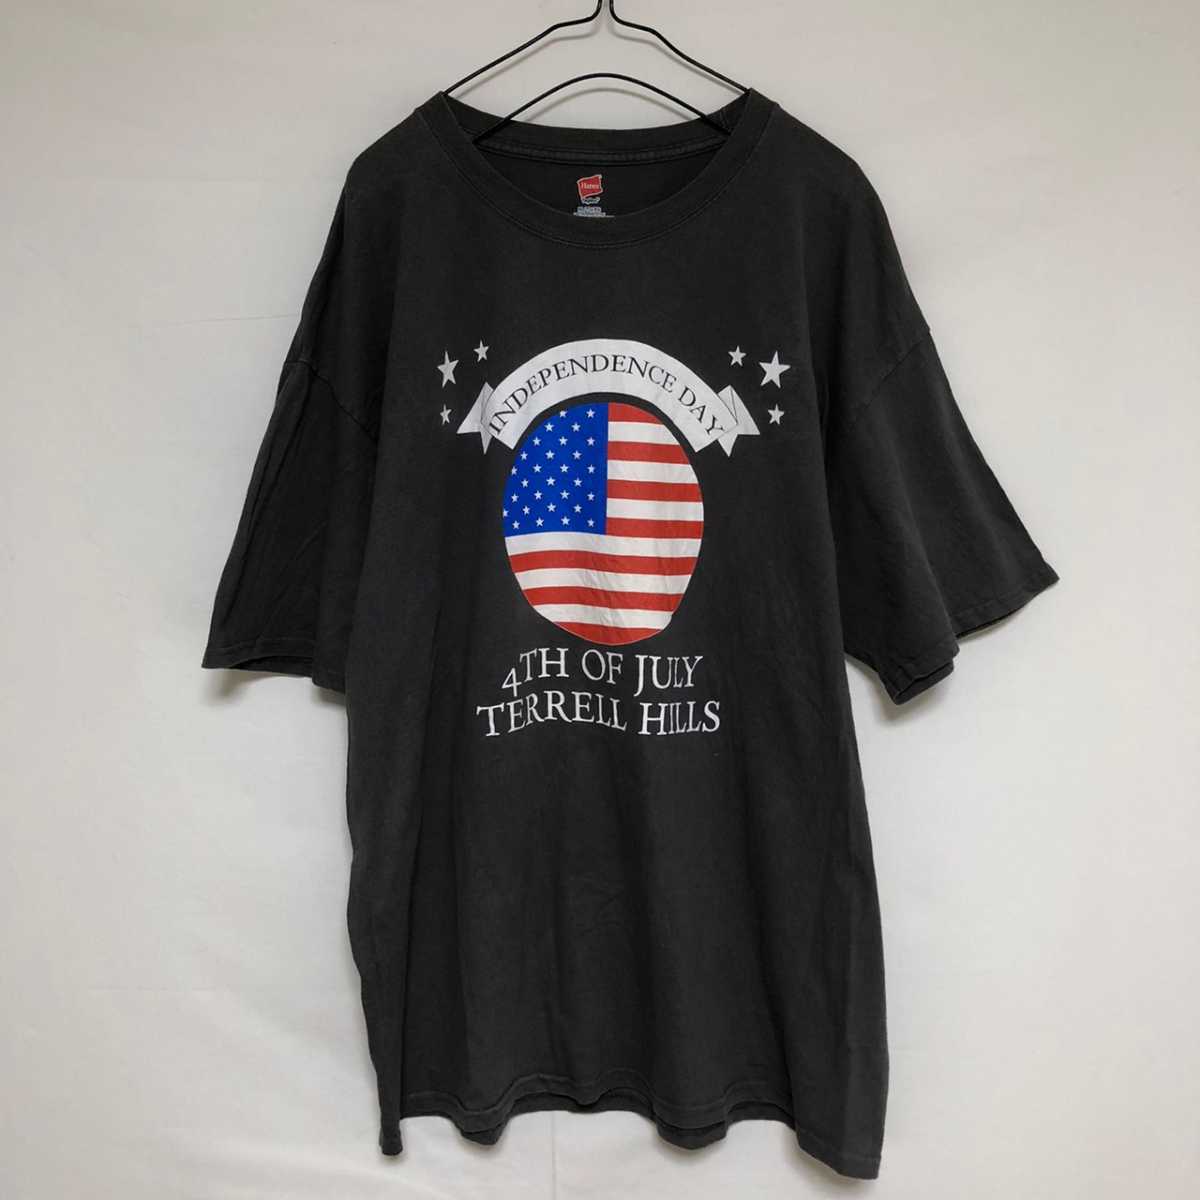 Hanes Tシャツ アメリカ USA Independence Day テレルヒルズ 記念 ダークグレー 4TH OF JULY TERRELL HIlLS 